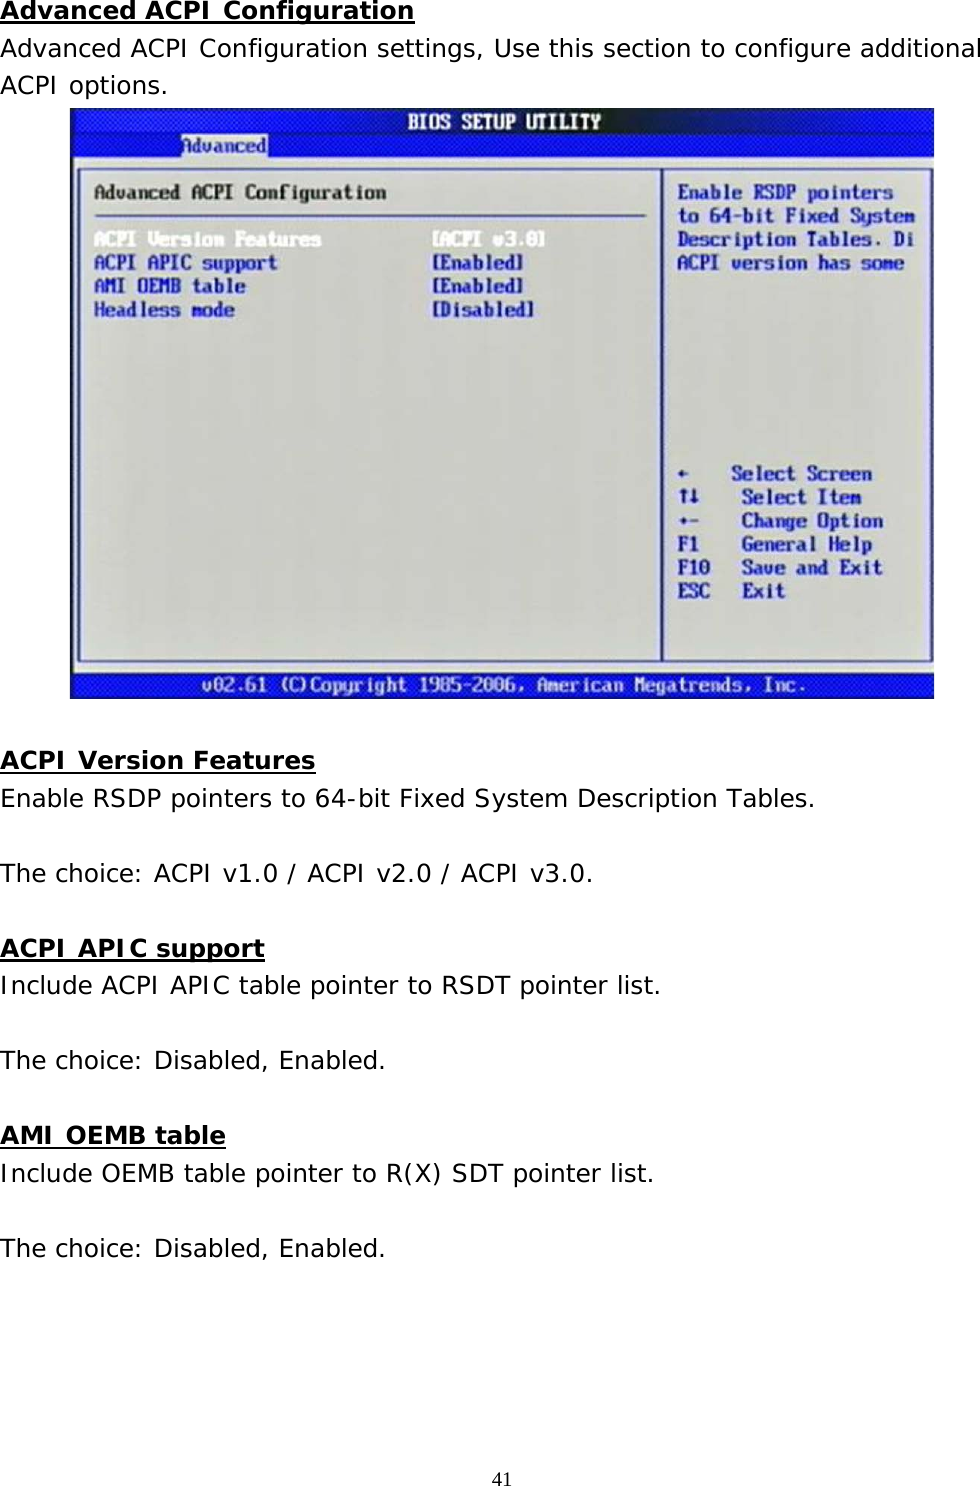  41 Advanced ACPI Configuration Advanced ACPI Configuration settings, Use this section to configure additional ACPI options.   ACPI Version Features Enable RSDP pointers to 64-bit Fixed System Description Tables.  The choice: ACPI v1.0 / ACPI v2.0 / ACPI v3.0.  ACPI APIC support Include ACPI APIC table pointer to RSDT pointer list.  The choice: Disabled, Enabled.  AMI OEMB table Include OEMB table pointer to R(X) SDT pointer list.  The choice: Disabled, Enabled.     